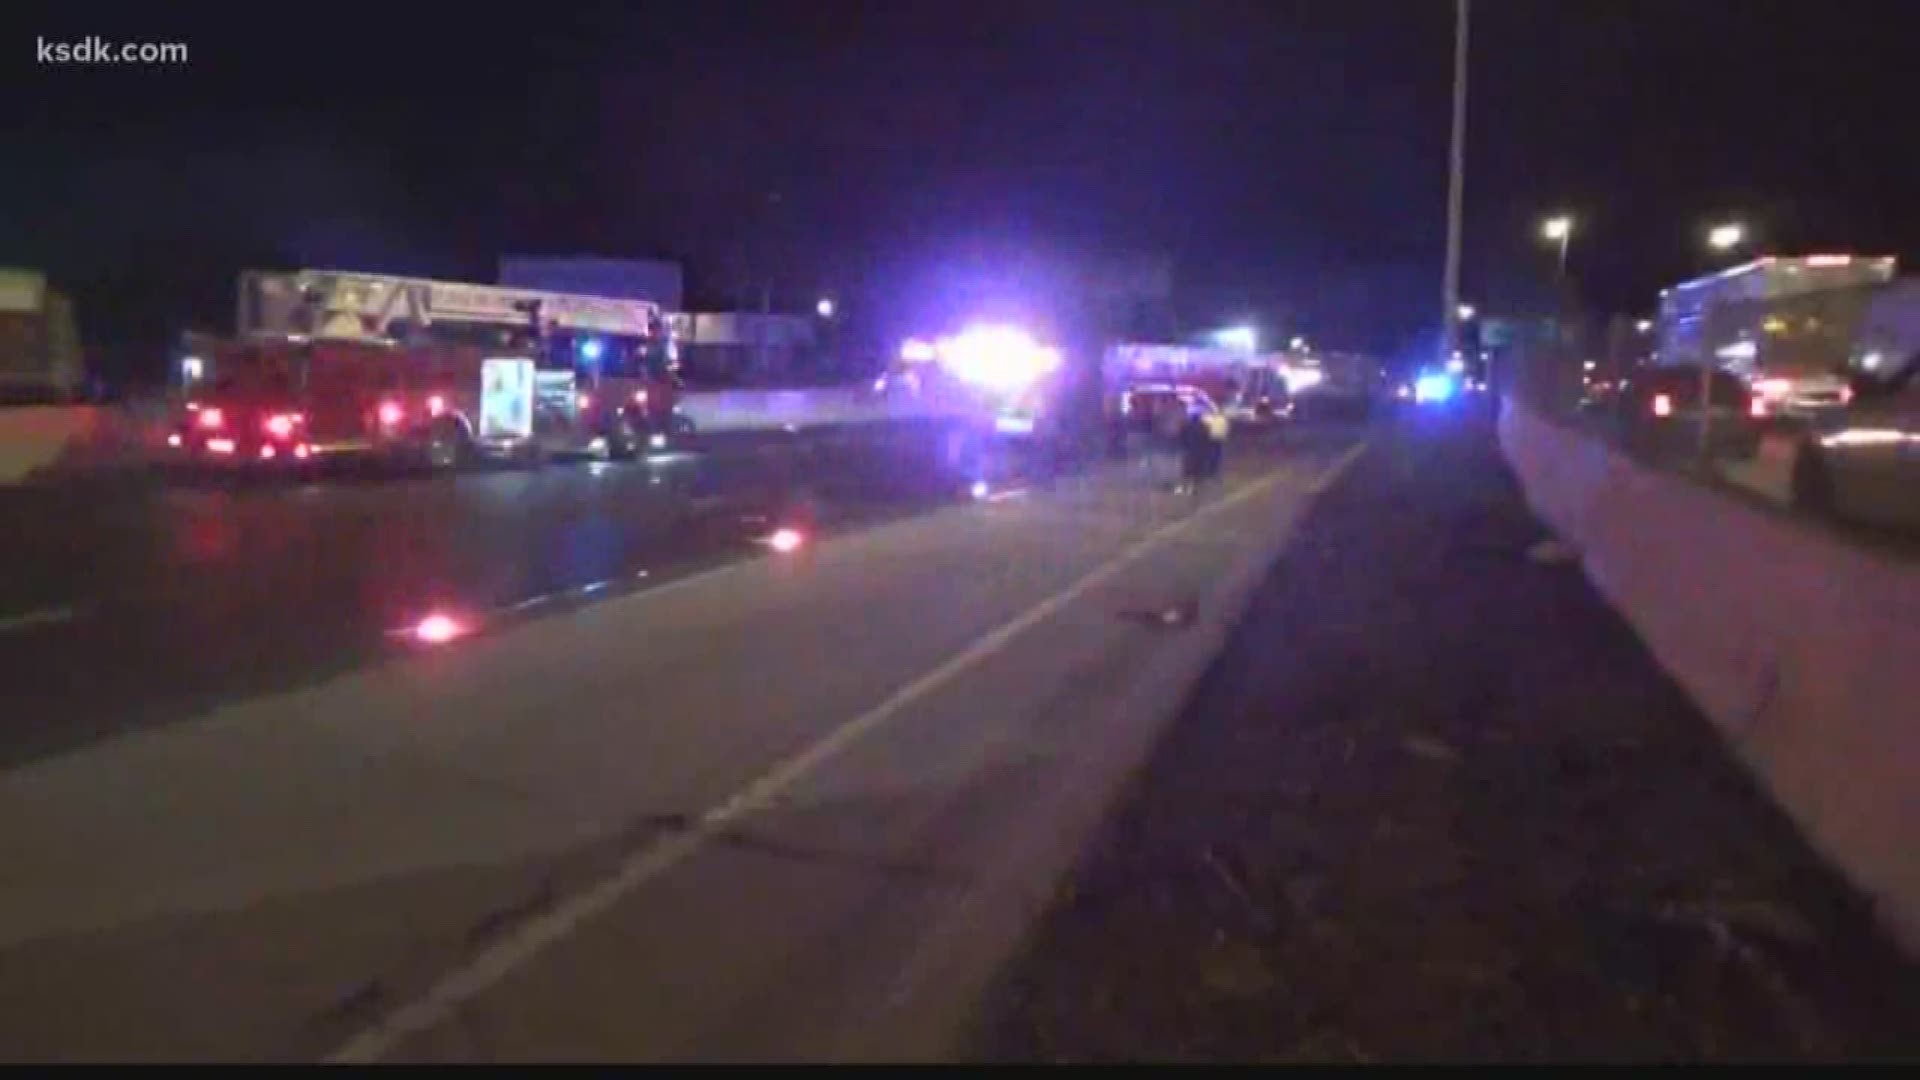 The interstate was shut down for several hours following the crash.